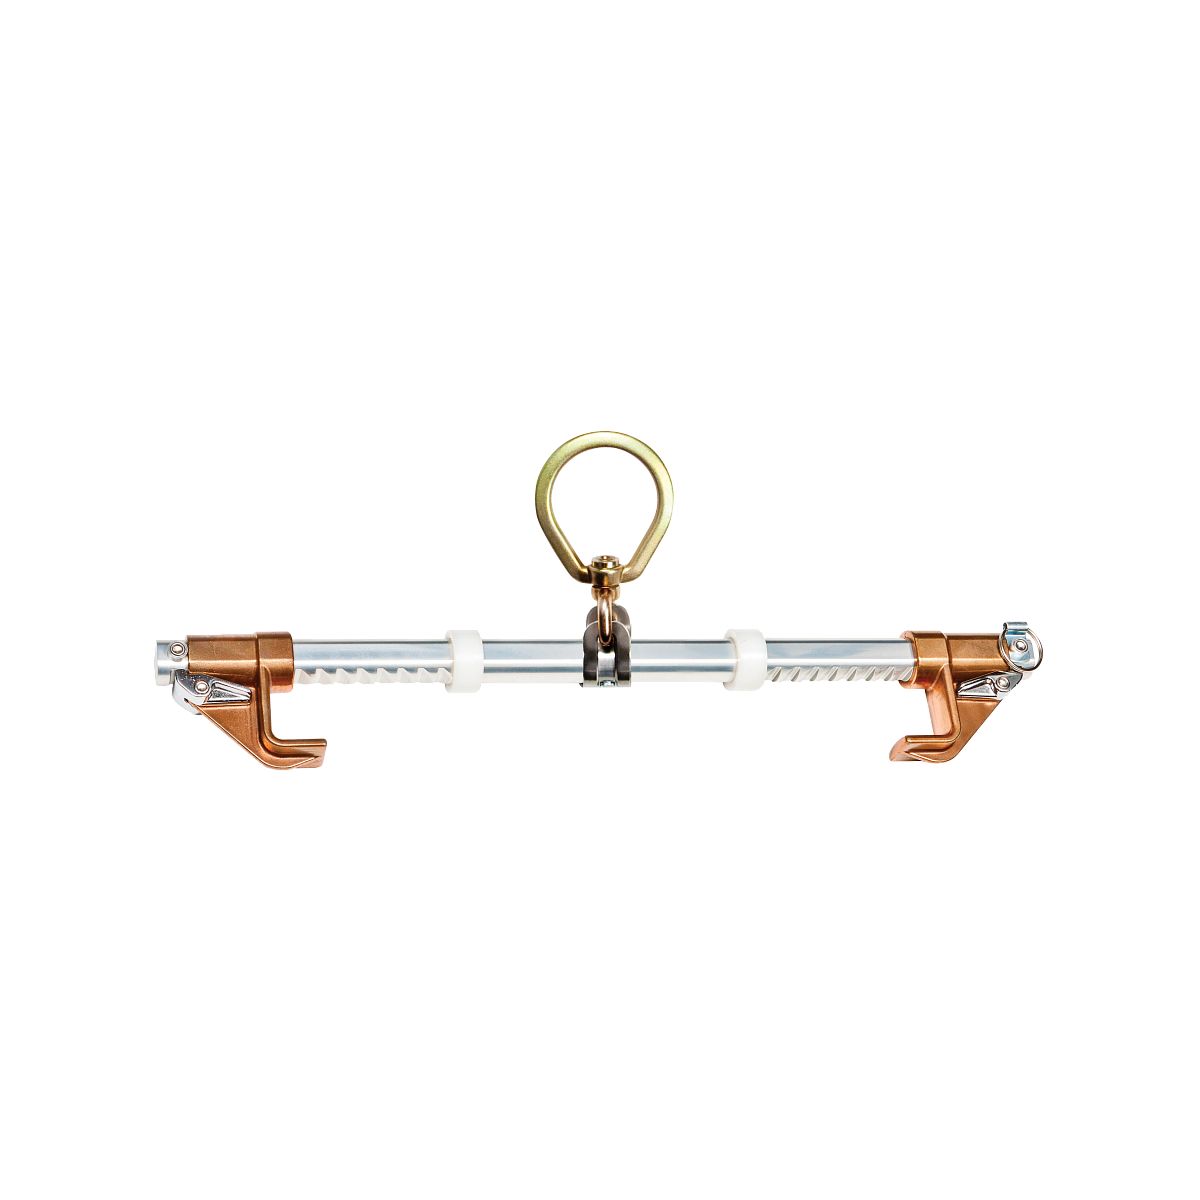 Werner I-Beam Sliding Anchor from GME Supply